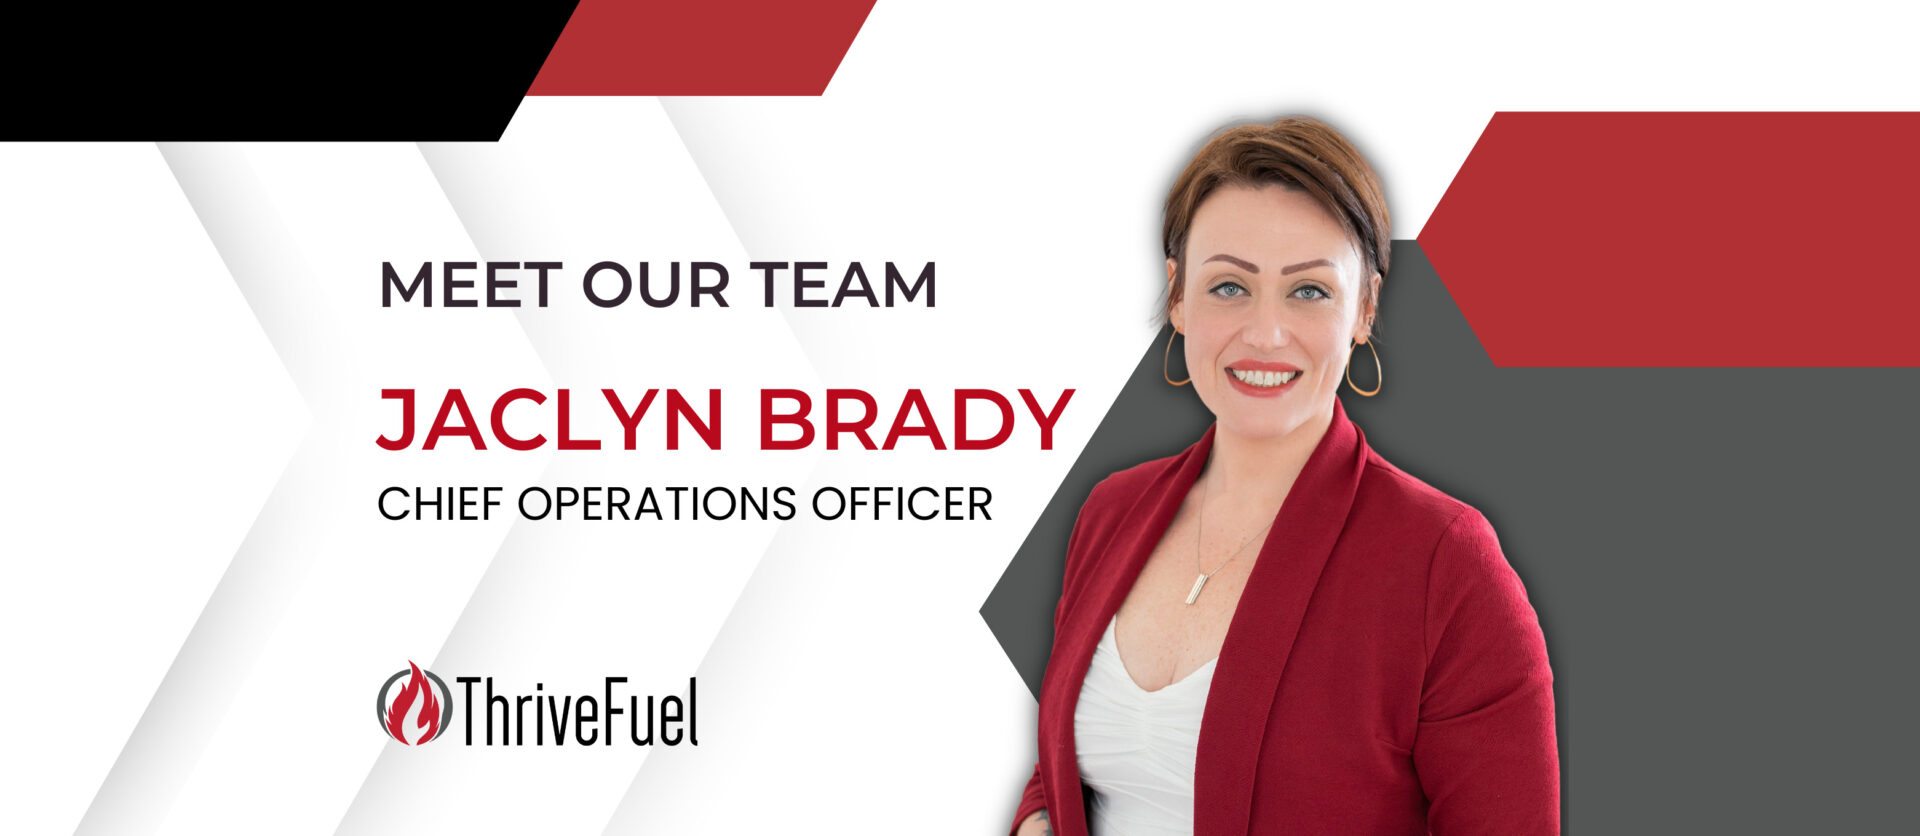 Jaclyn Brady Joins the Executive Leadership Team at ThriveFuel!